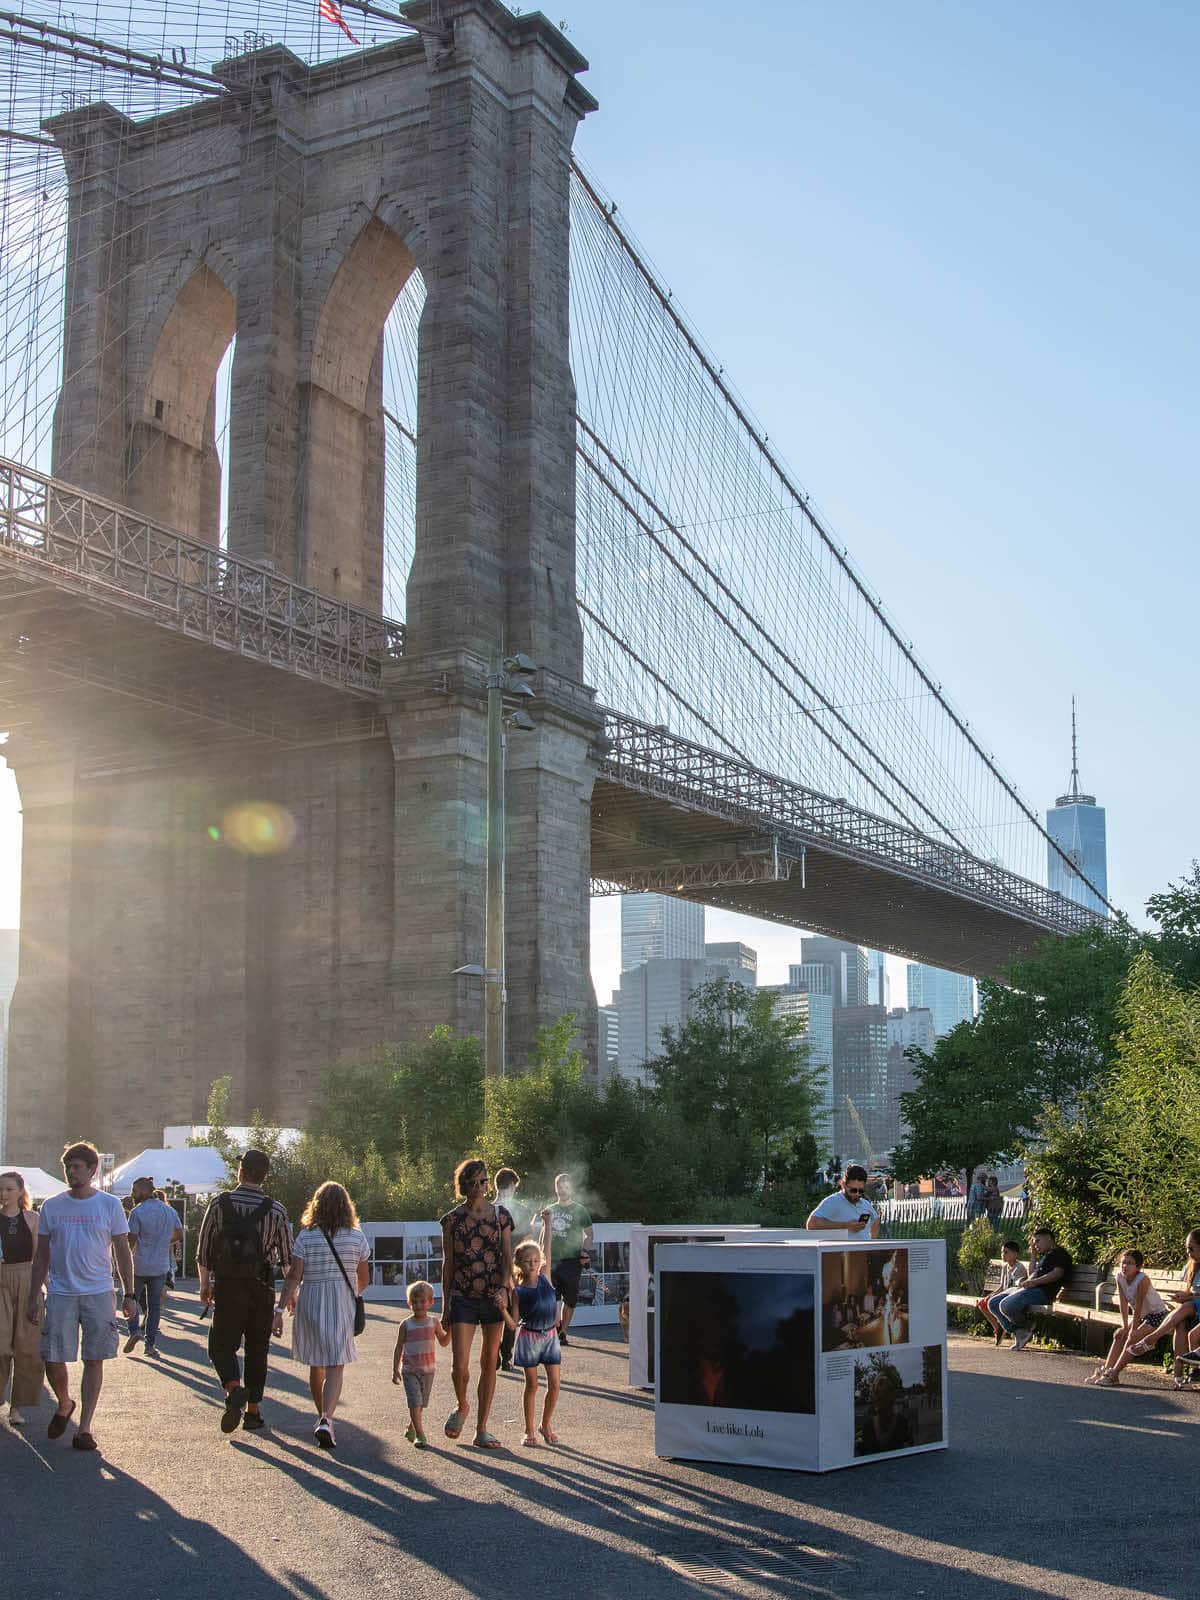 Cube shaped displays with photos on the pathway under the Brooklyn Bridge as a part of the Photoville exhibition.